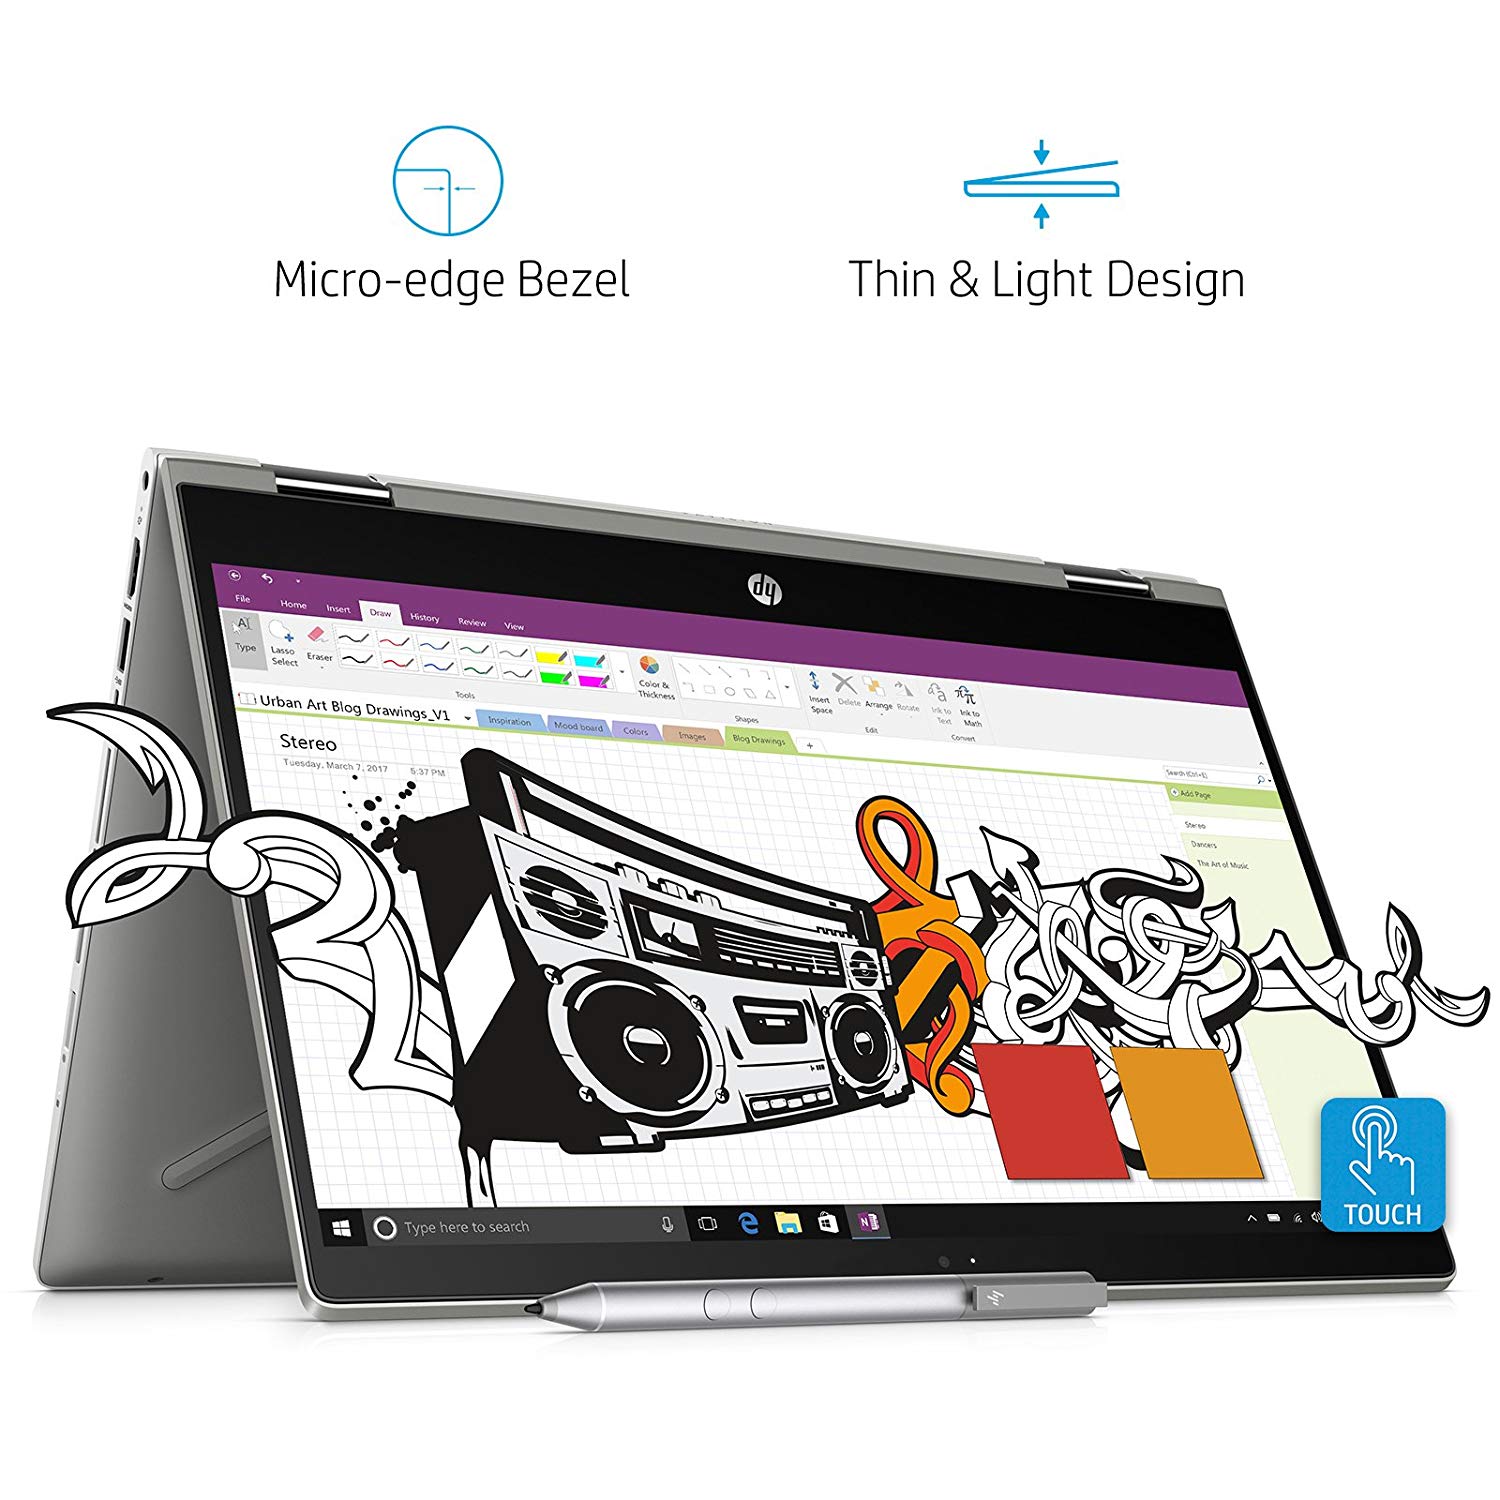 HP Pavilion x360 Intel Core i3 8th Gen 14-inch Touchscreen 2-in-1 FHD Thin and Light Laptop (4GB/1TB+8GB SSHD/Windows 10 Home/MS Office/Natural Silver/1.59 kg), cd0077TU